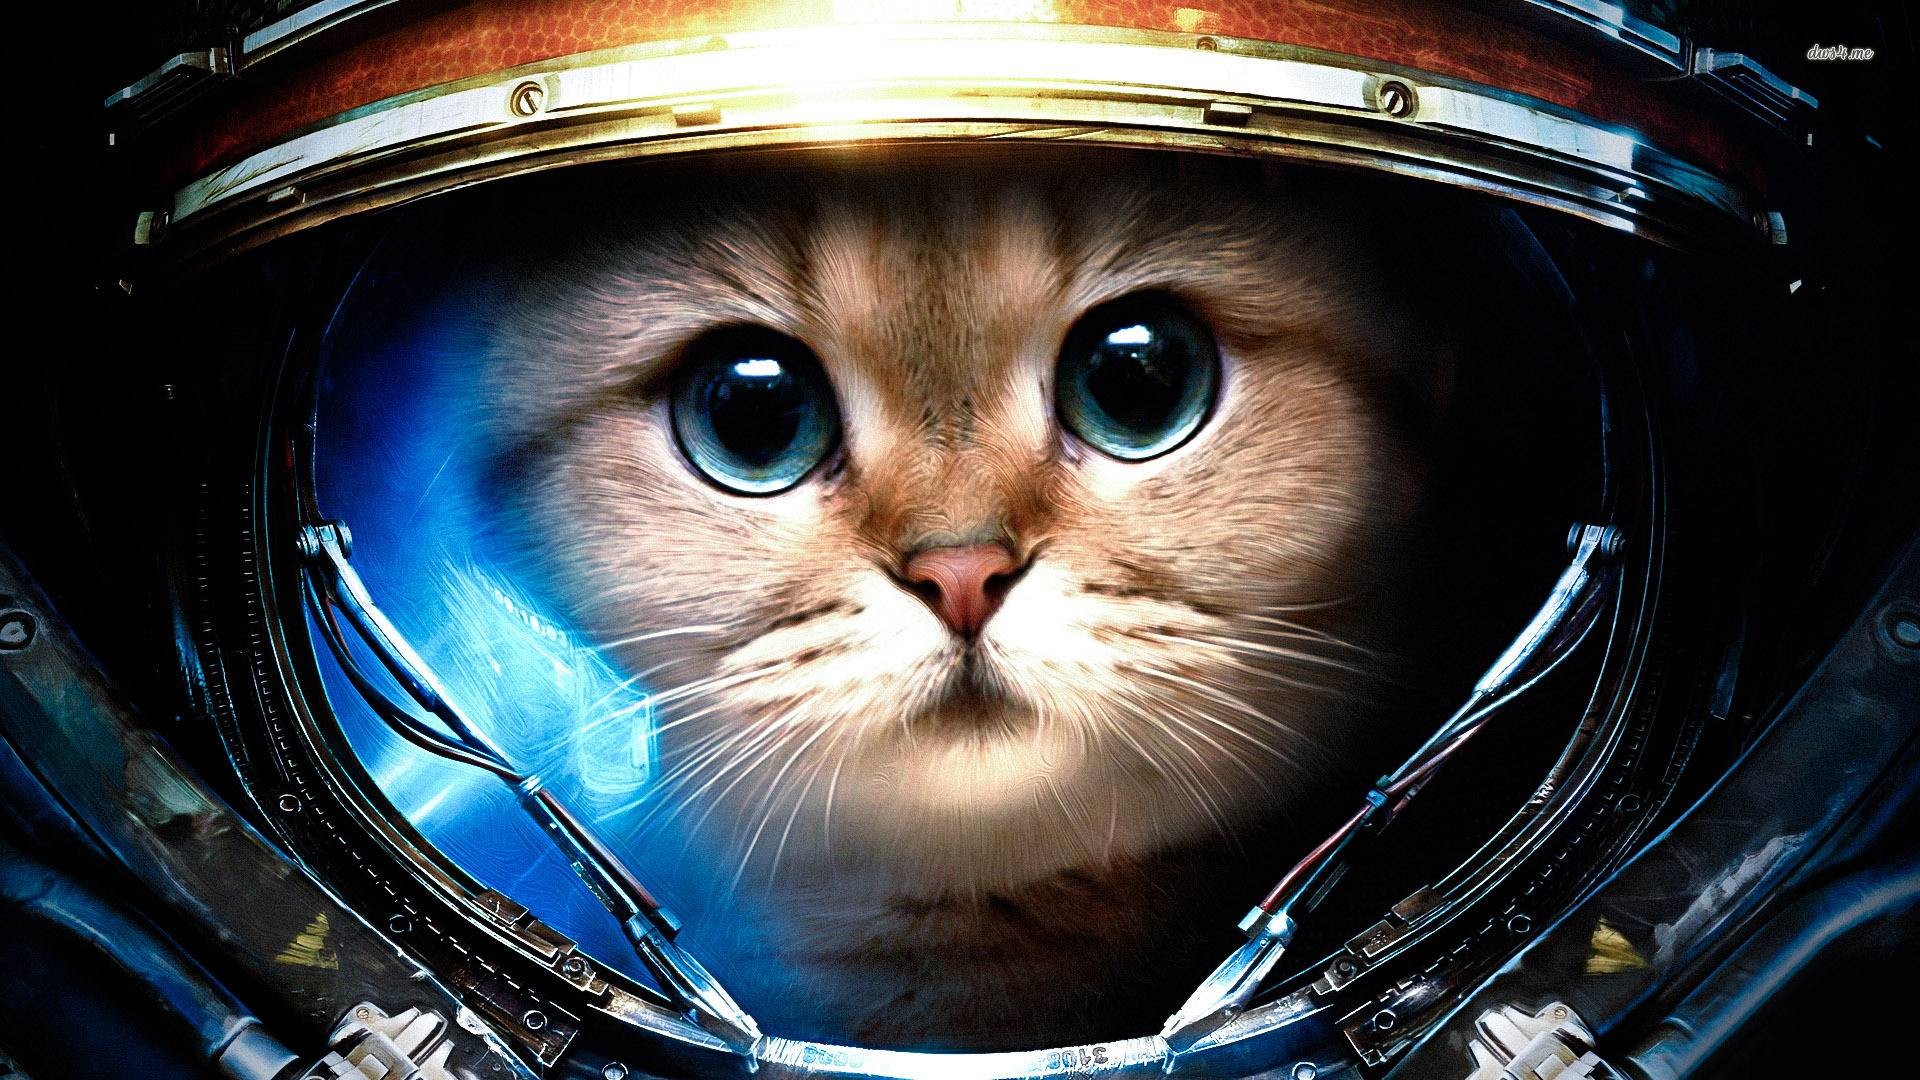 Space Cats Wallpaper